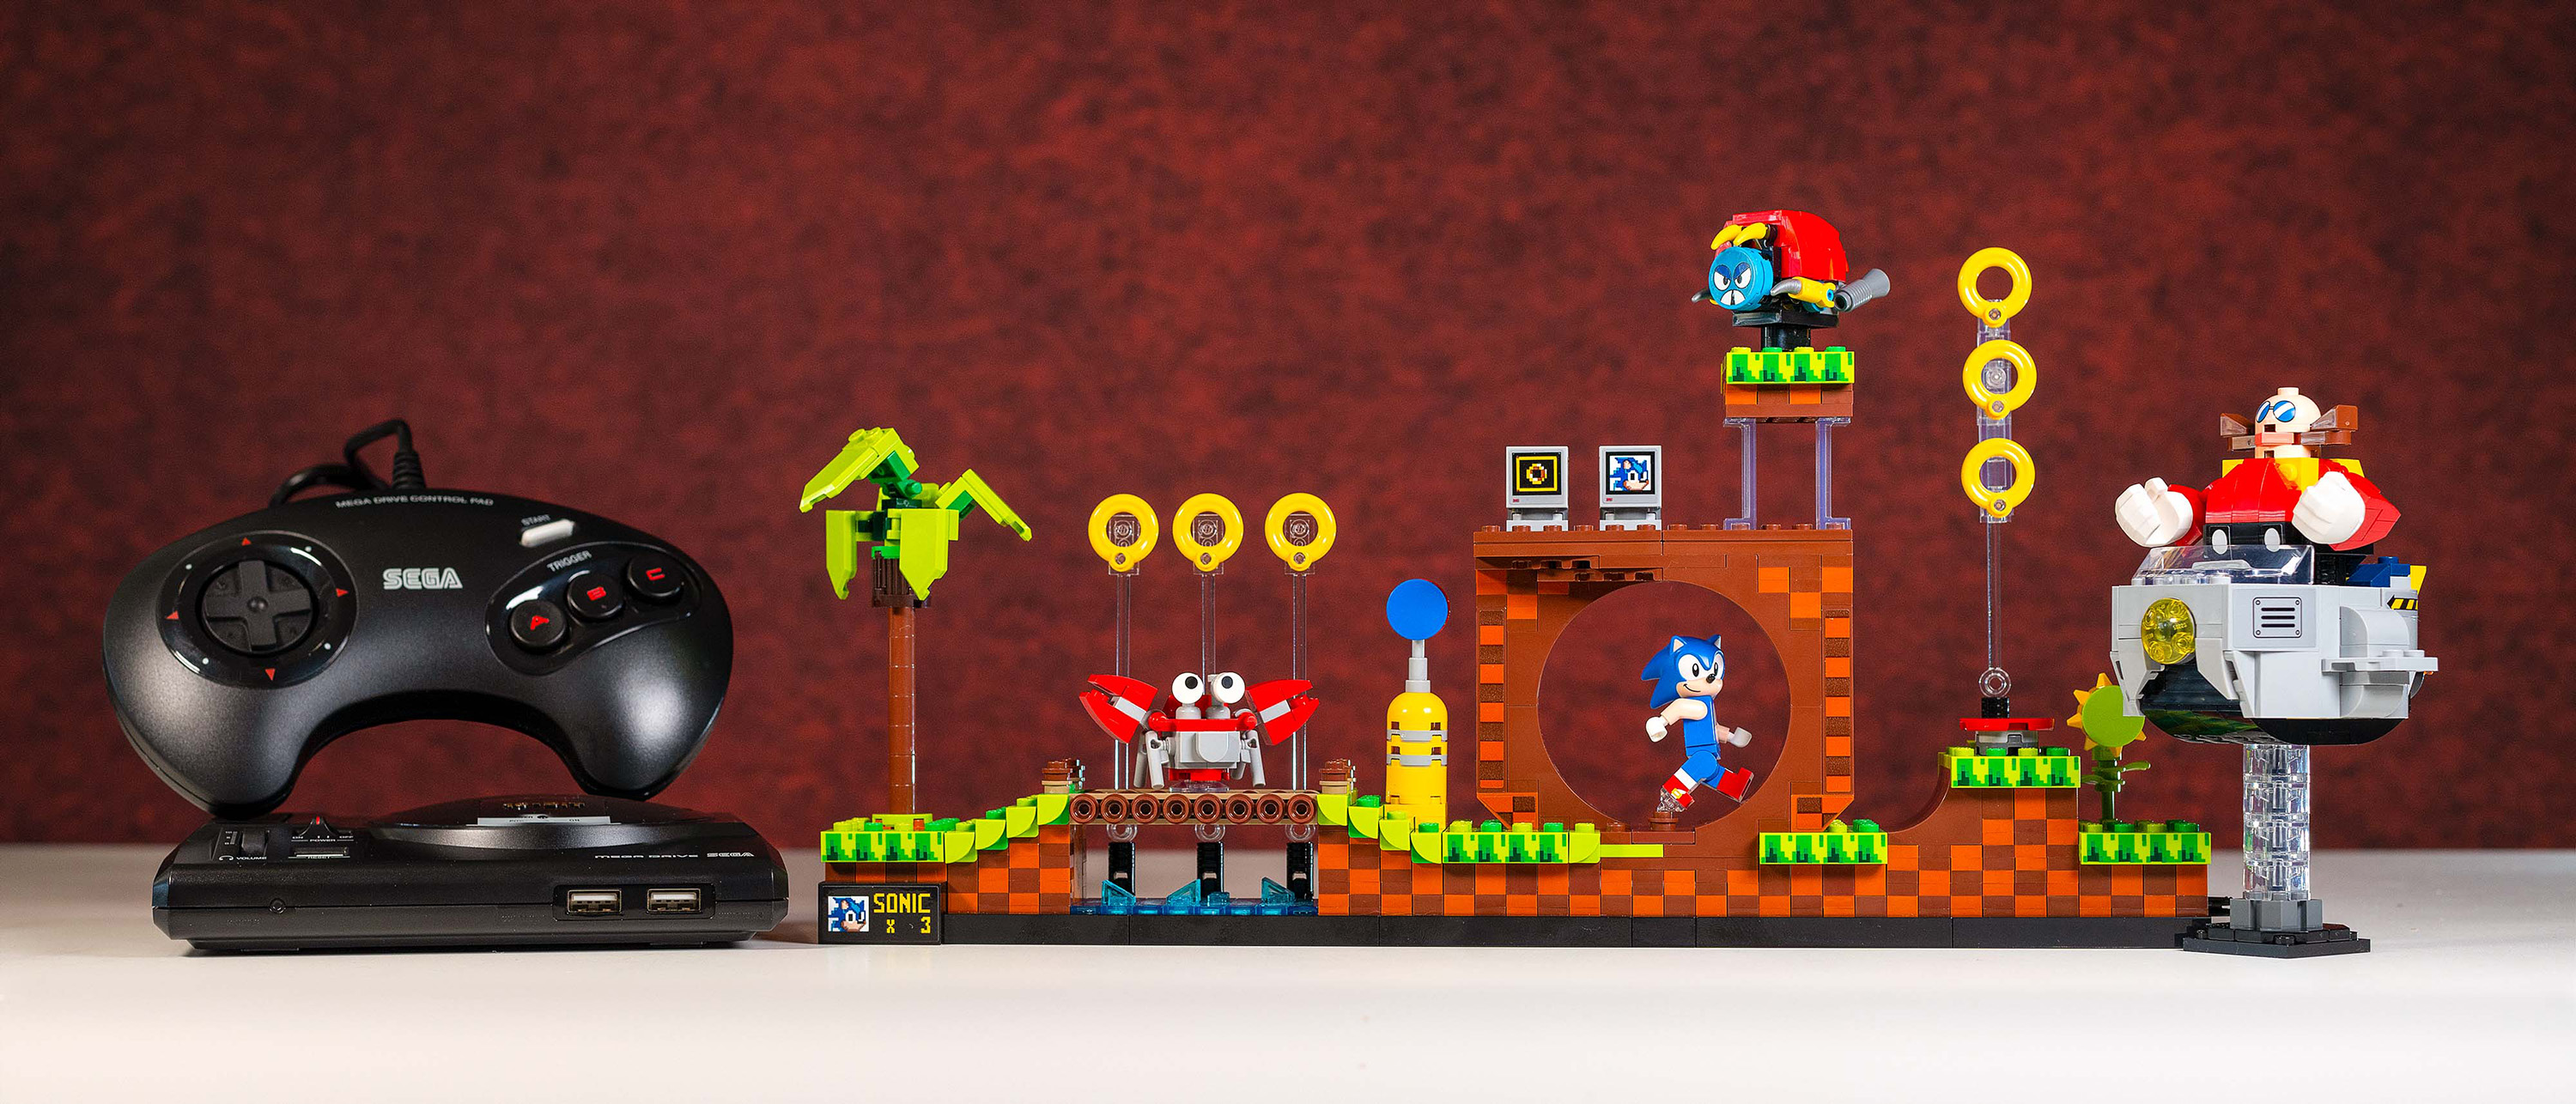 LEGO Ideas: Sonic the Hedgehog - Green Hill Zone (21331) for sale online